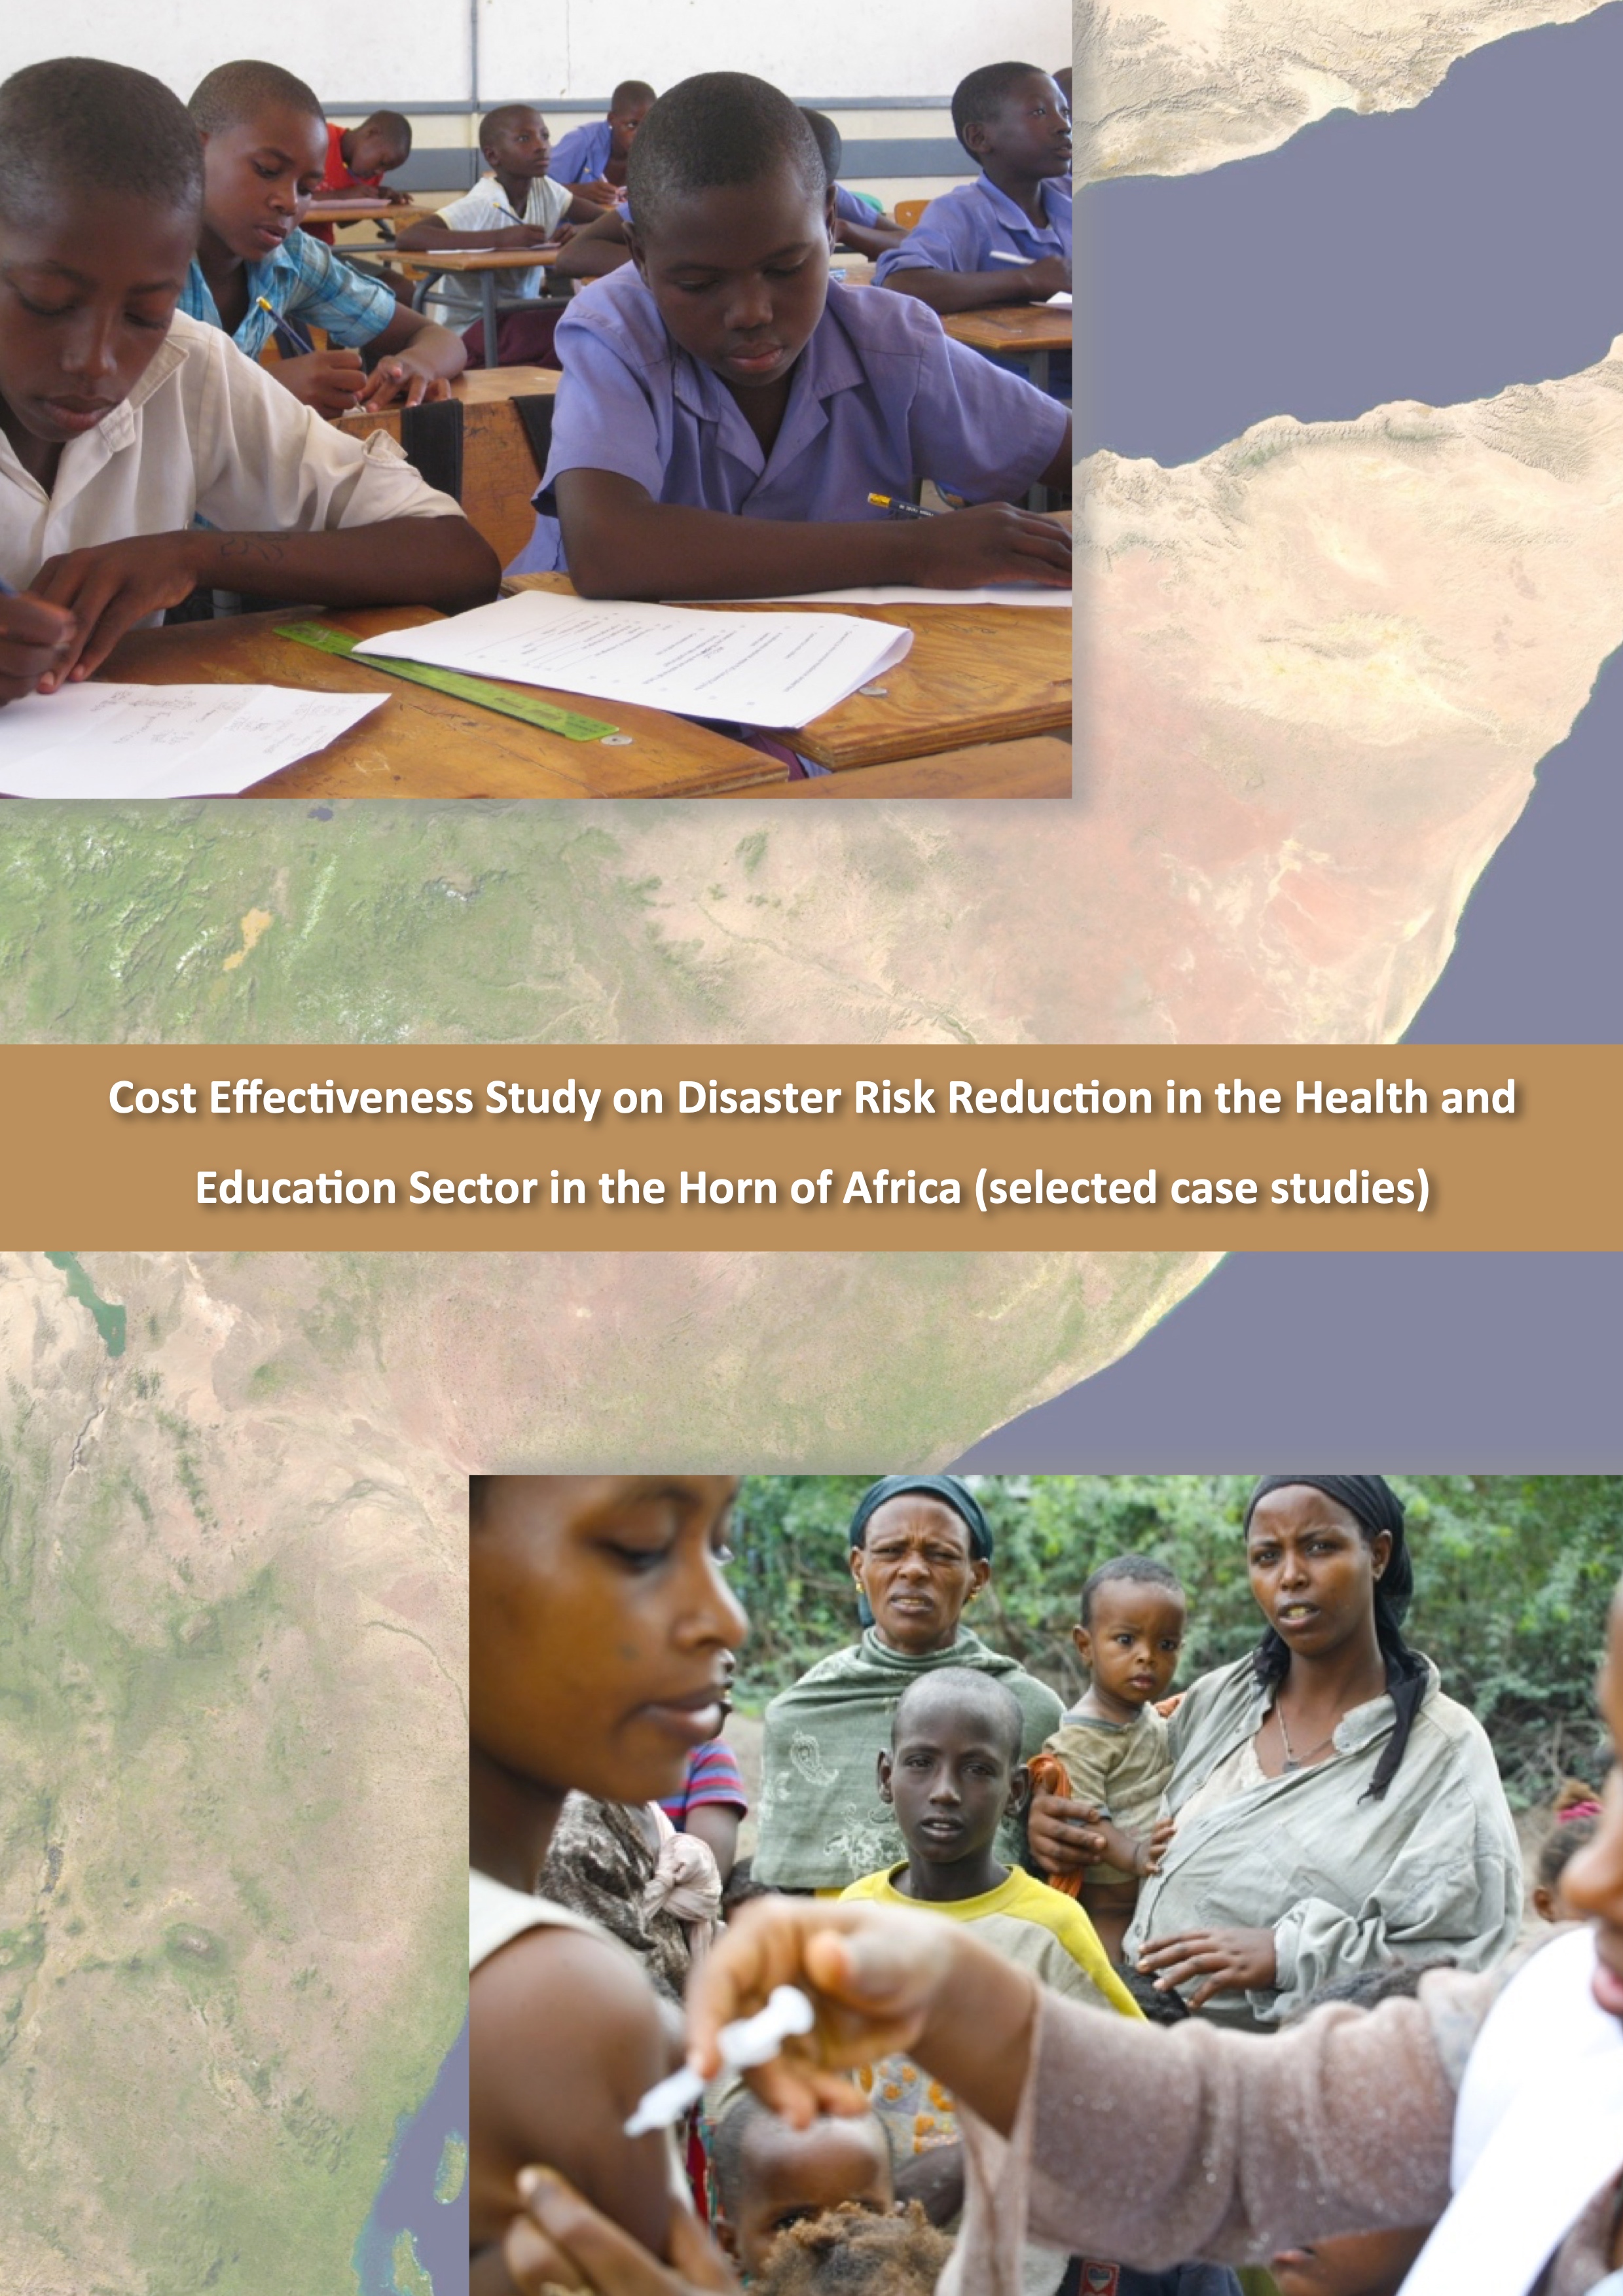 Cost Effectiveness Study on Disaster Risk Reduction in the Health and Education Sector in the Horn of Africa (selected case studies)